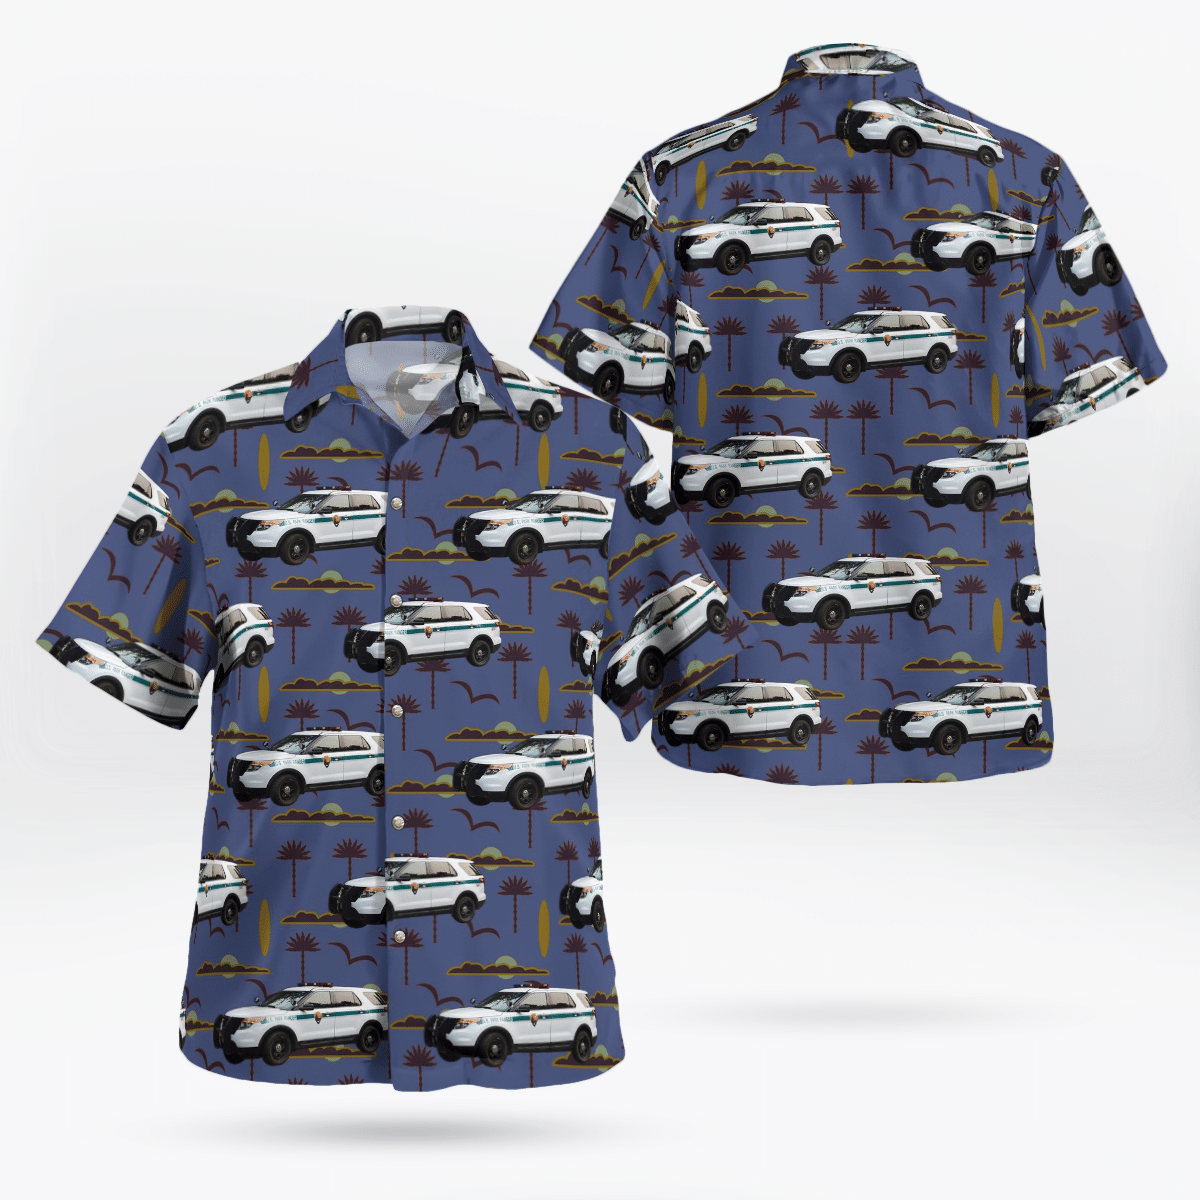 Shop now to find the perfect Hawaii Shirt for your hobby 168